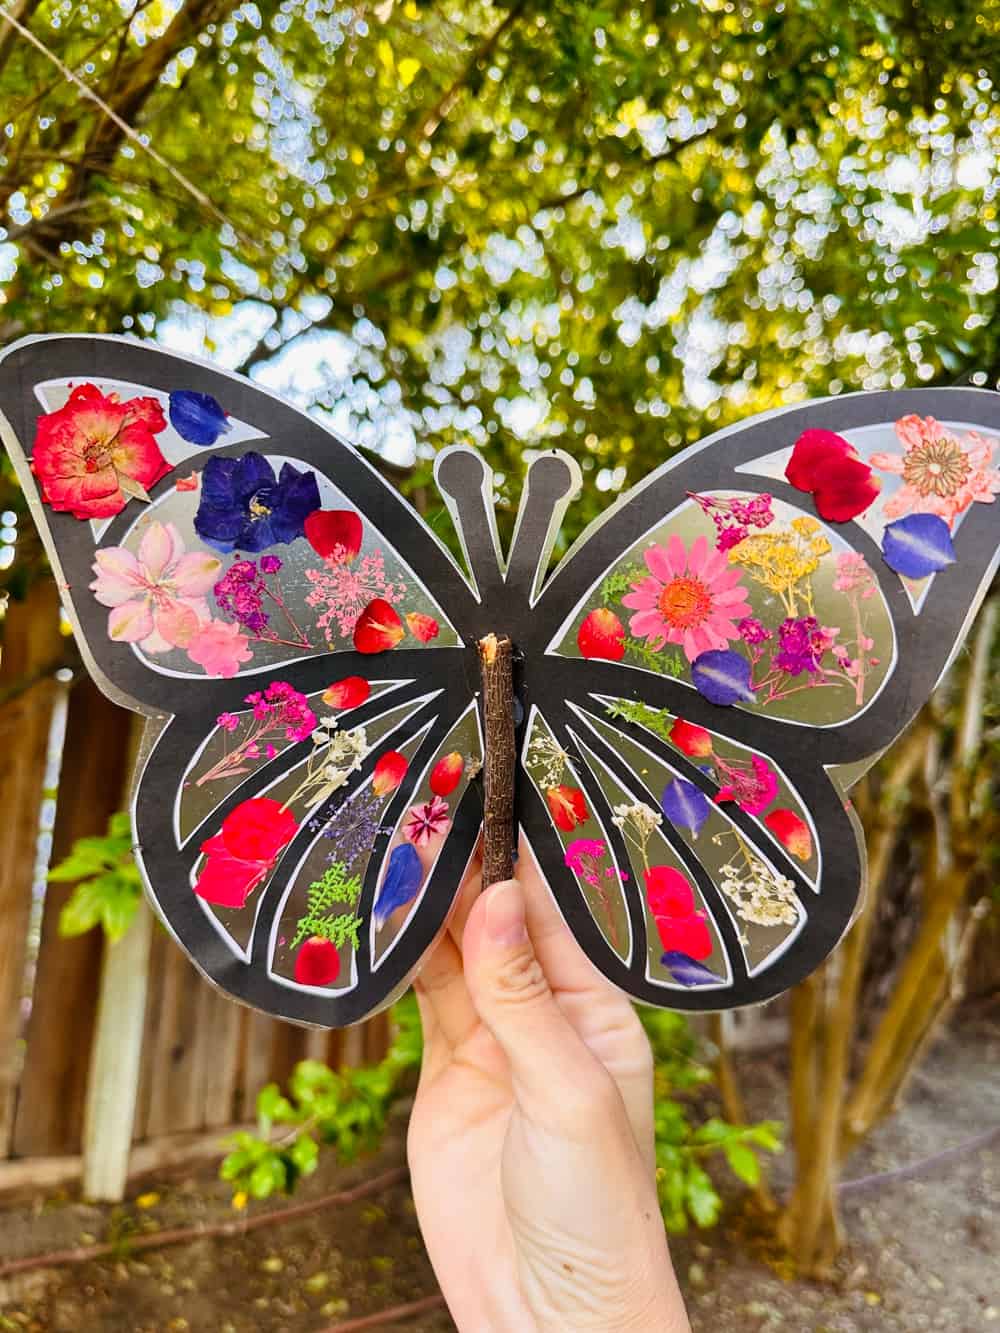 Make a Beautiful Pressed Flower Butterfly Craft